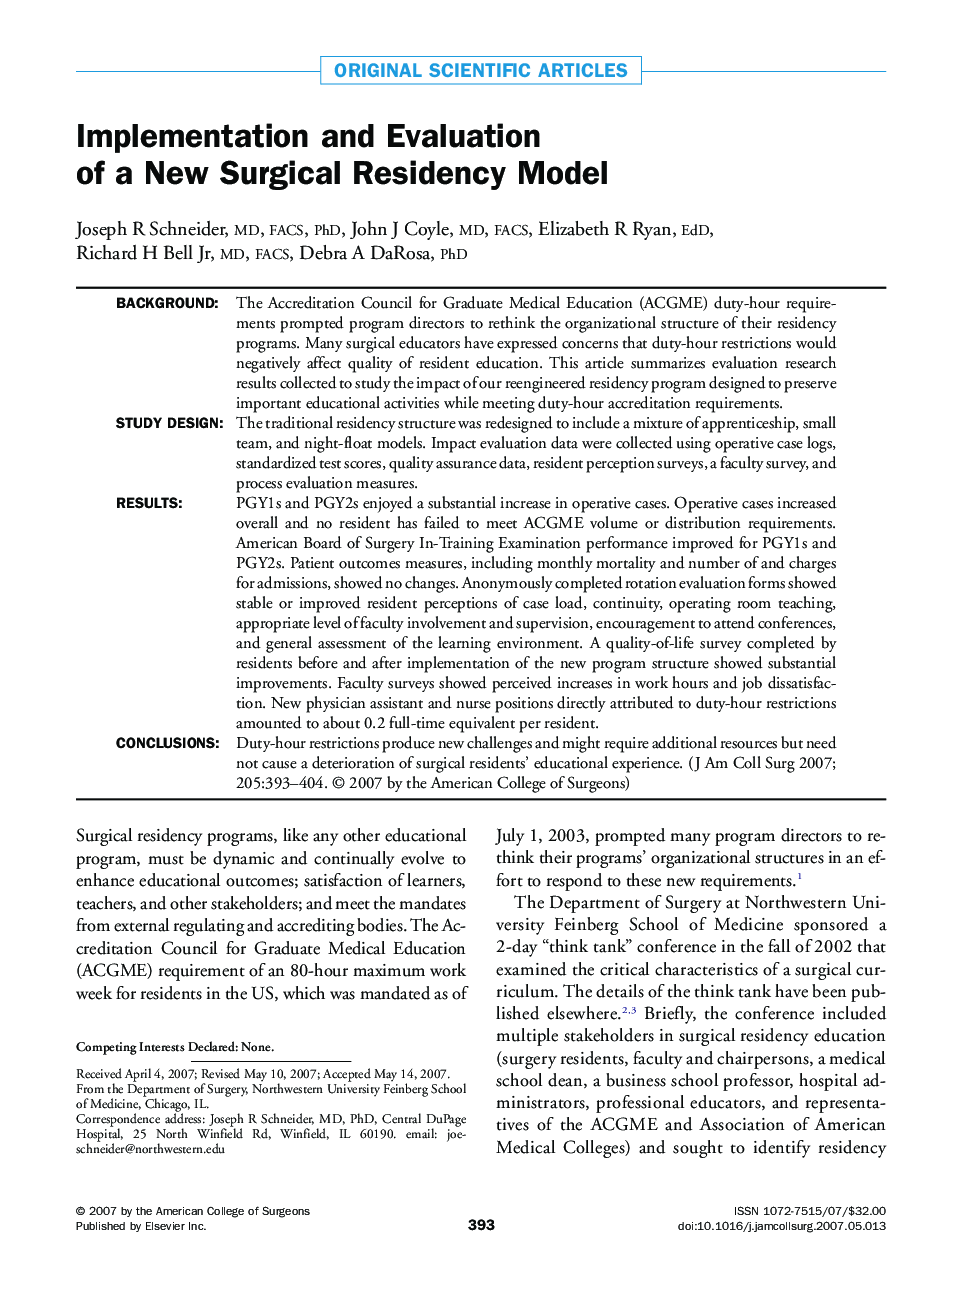 Implementation and Evaluation of a New Surgical Residency Model 